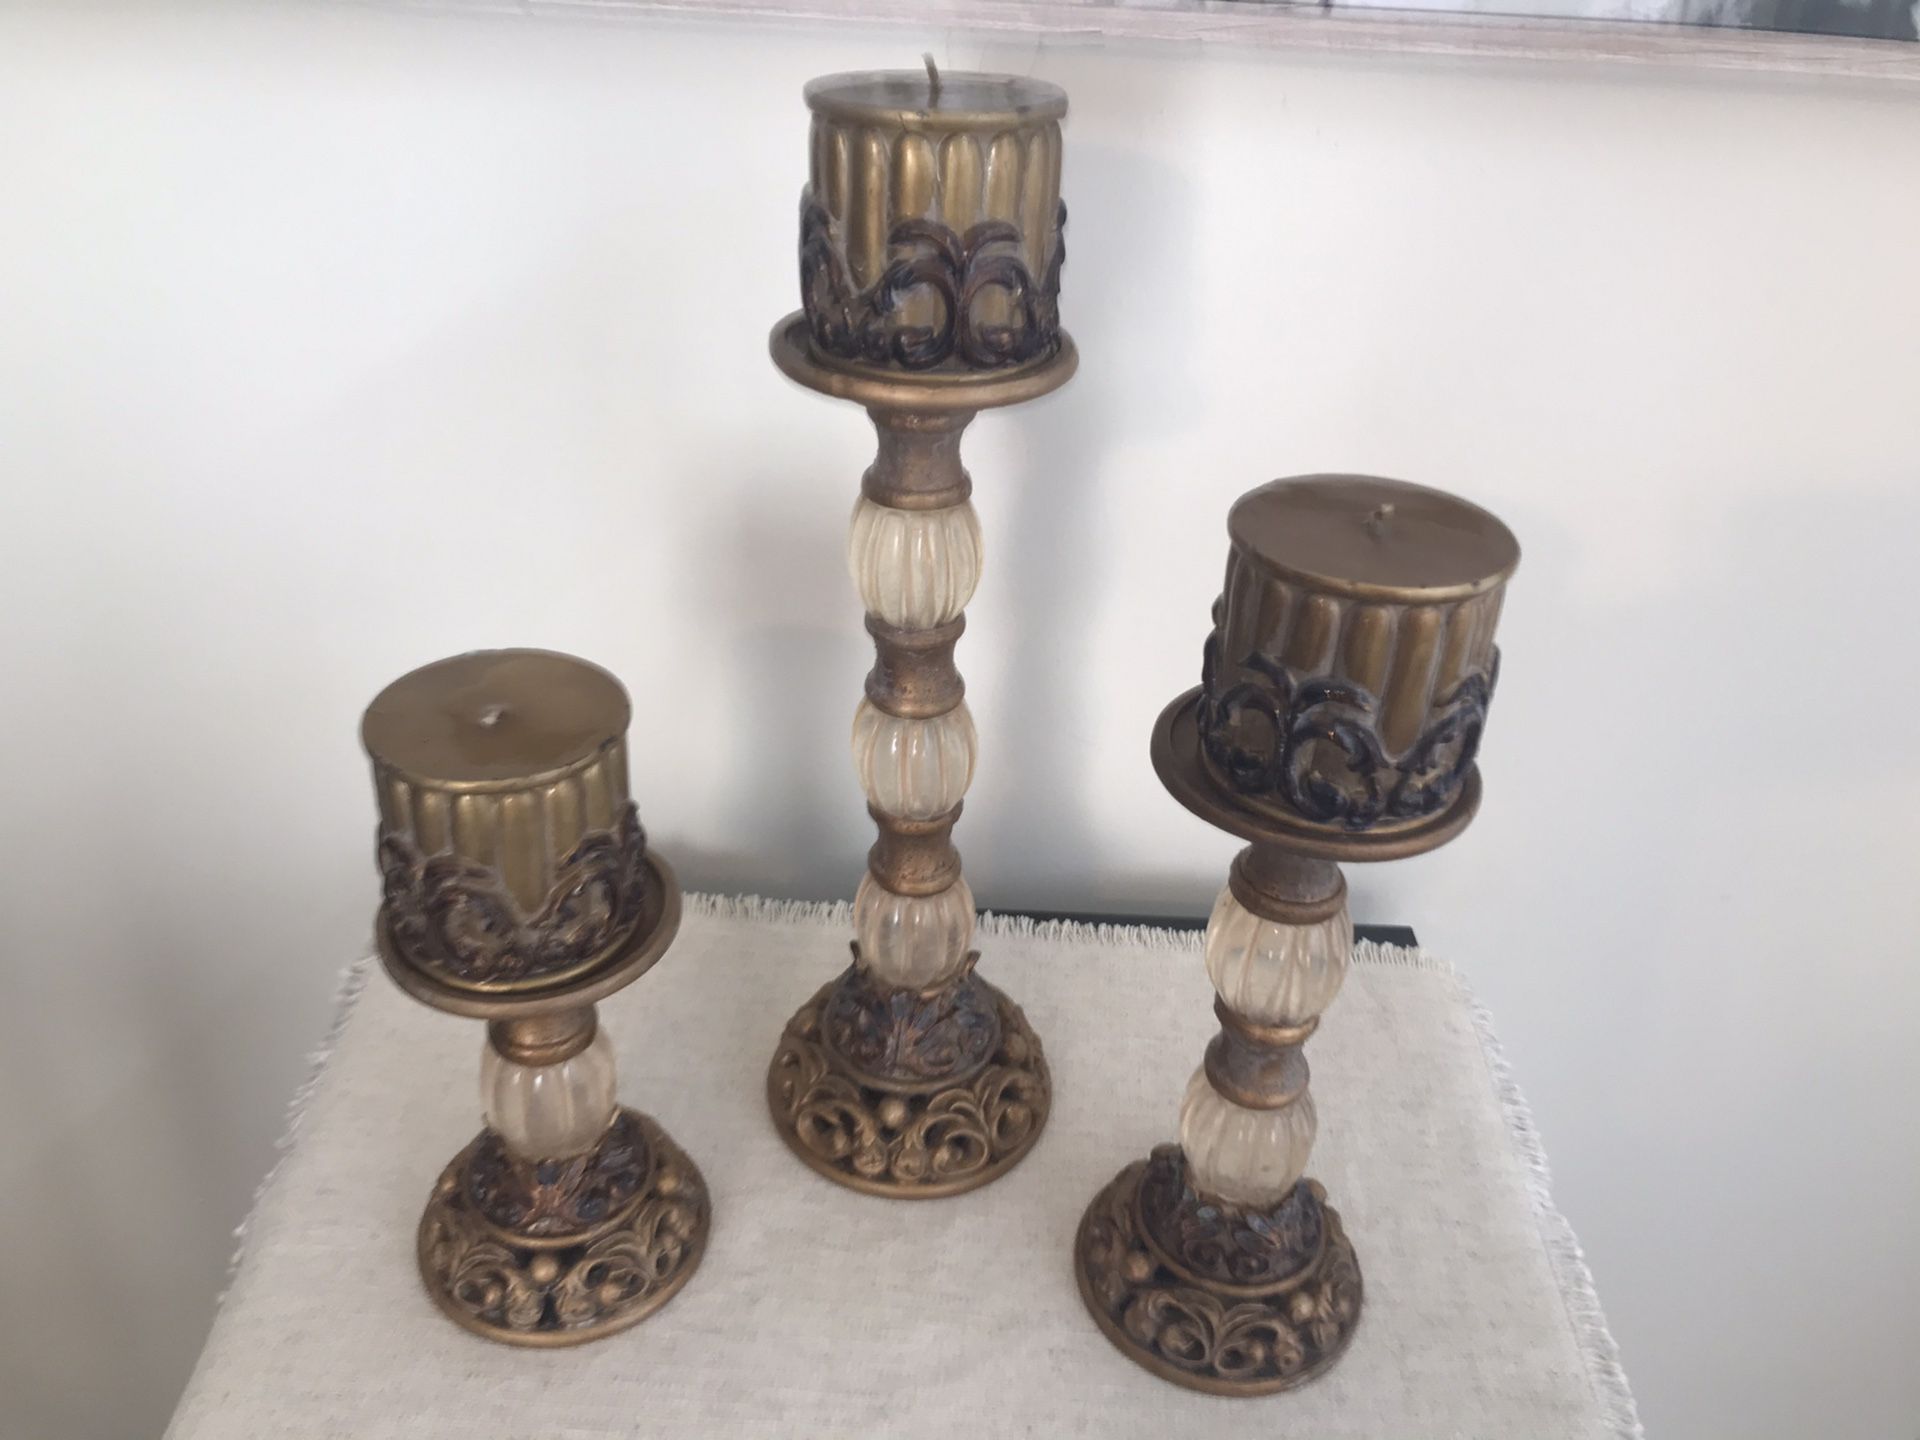 3 gold colored candle pillars/holders with candles